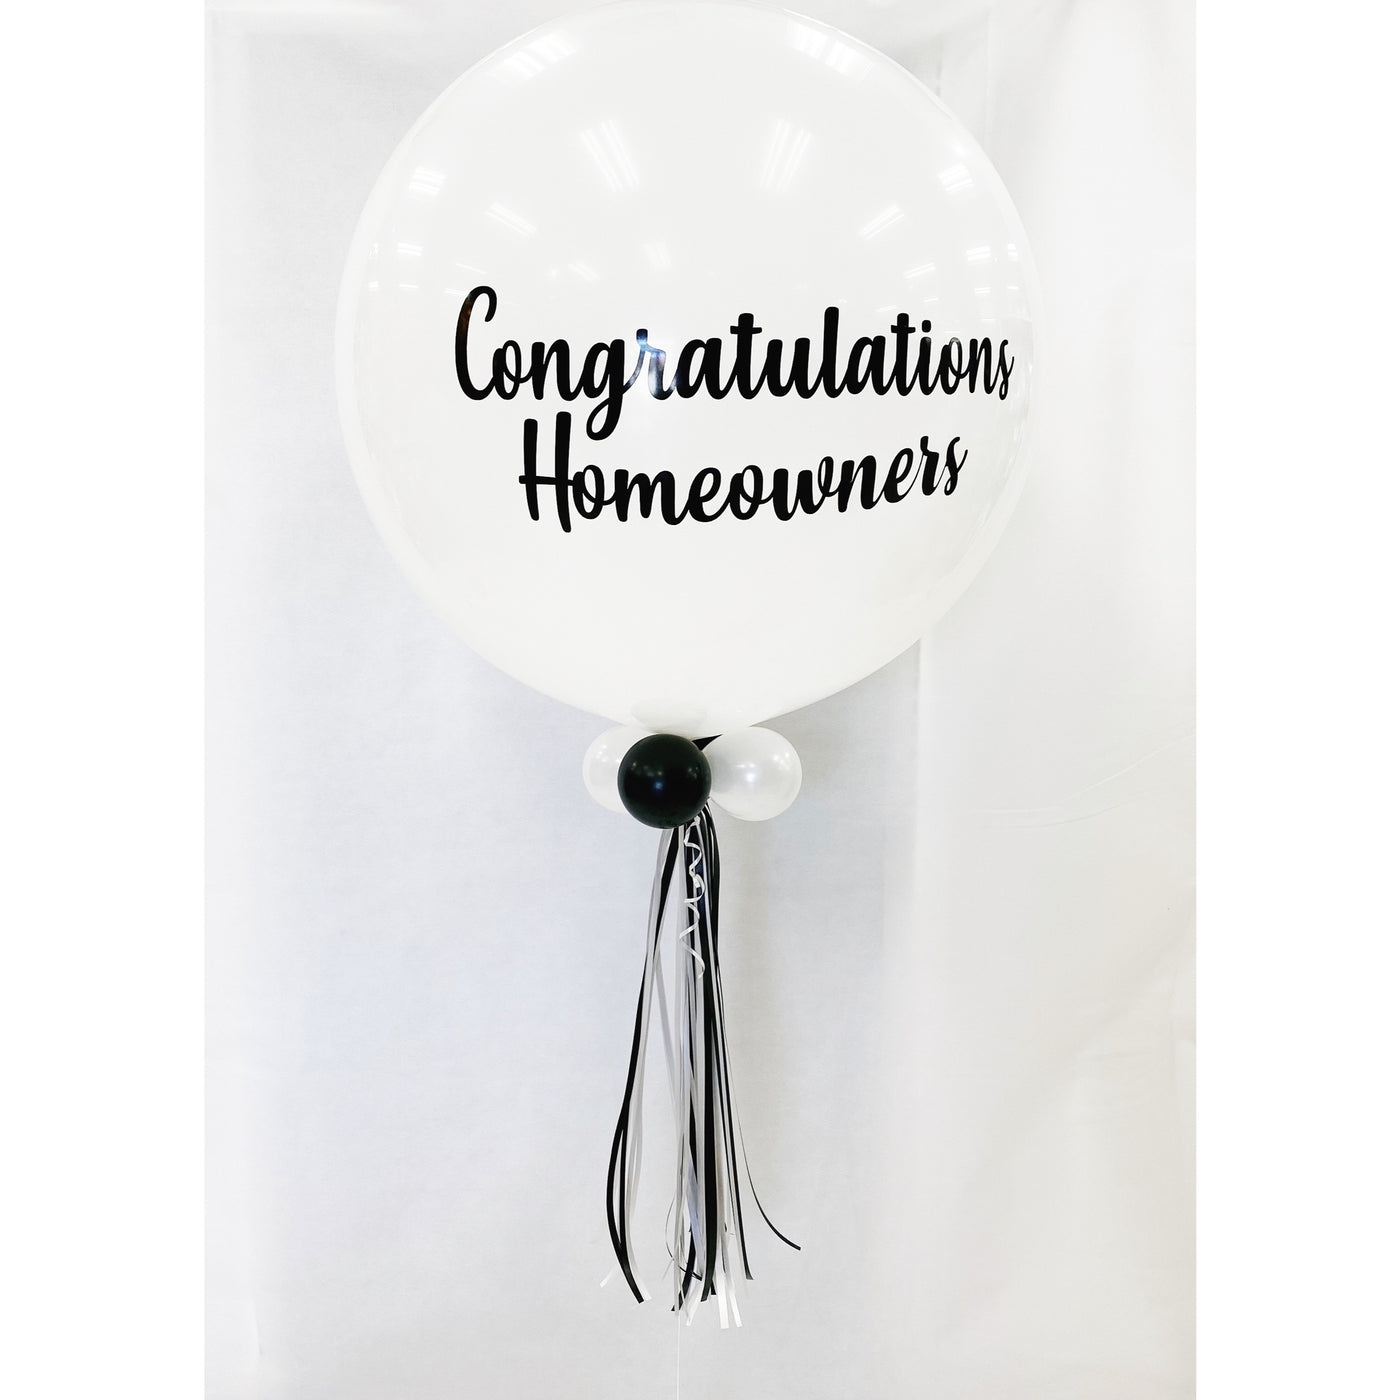 Personalized Congratulations Balloons with cluster